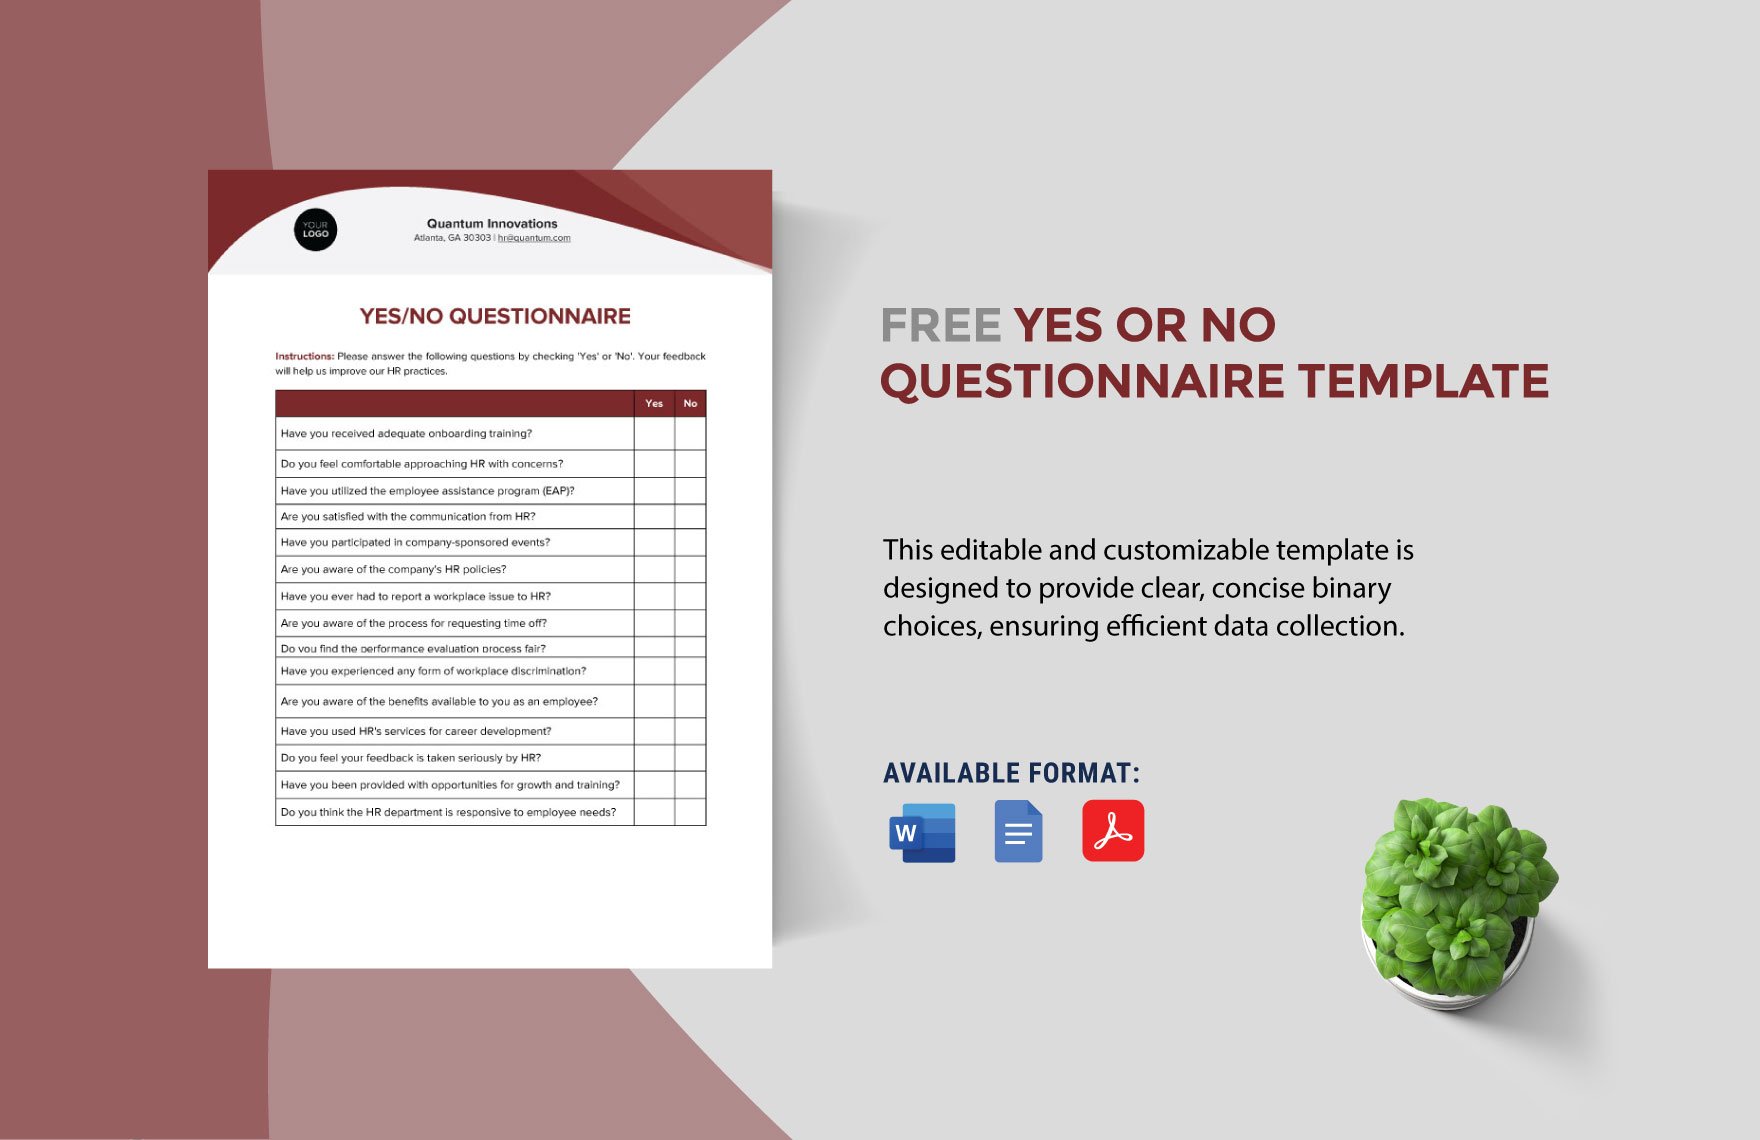 Free Yes or No Questionnaire Template